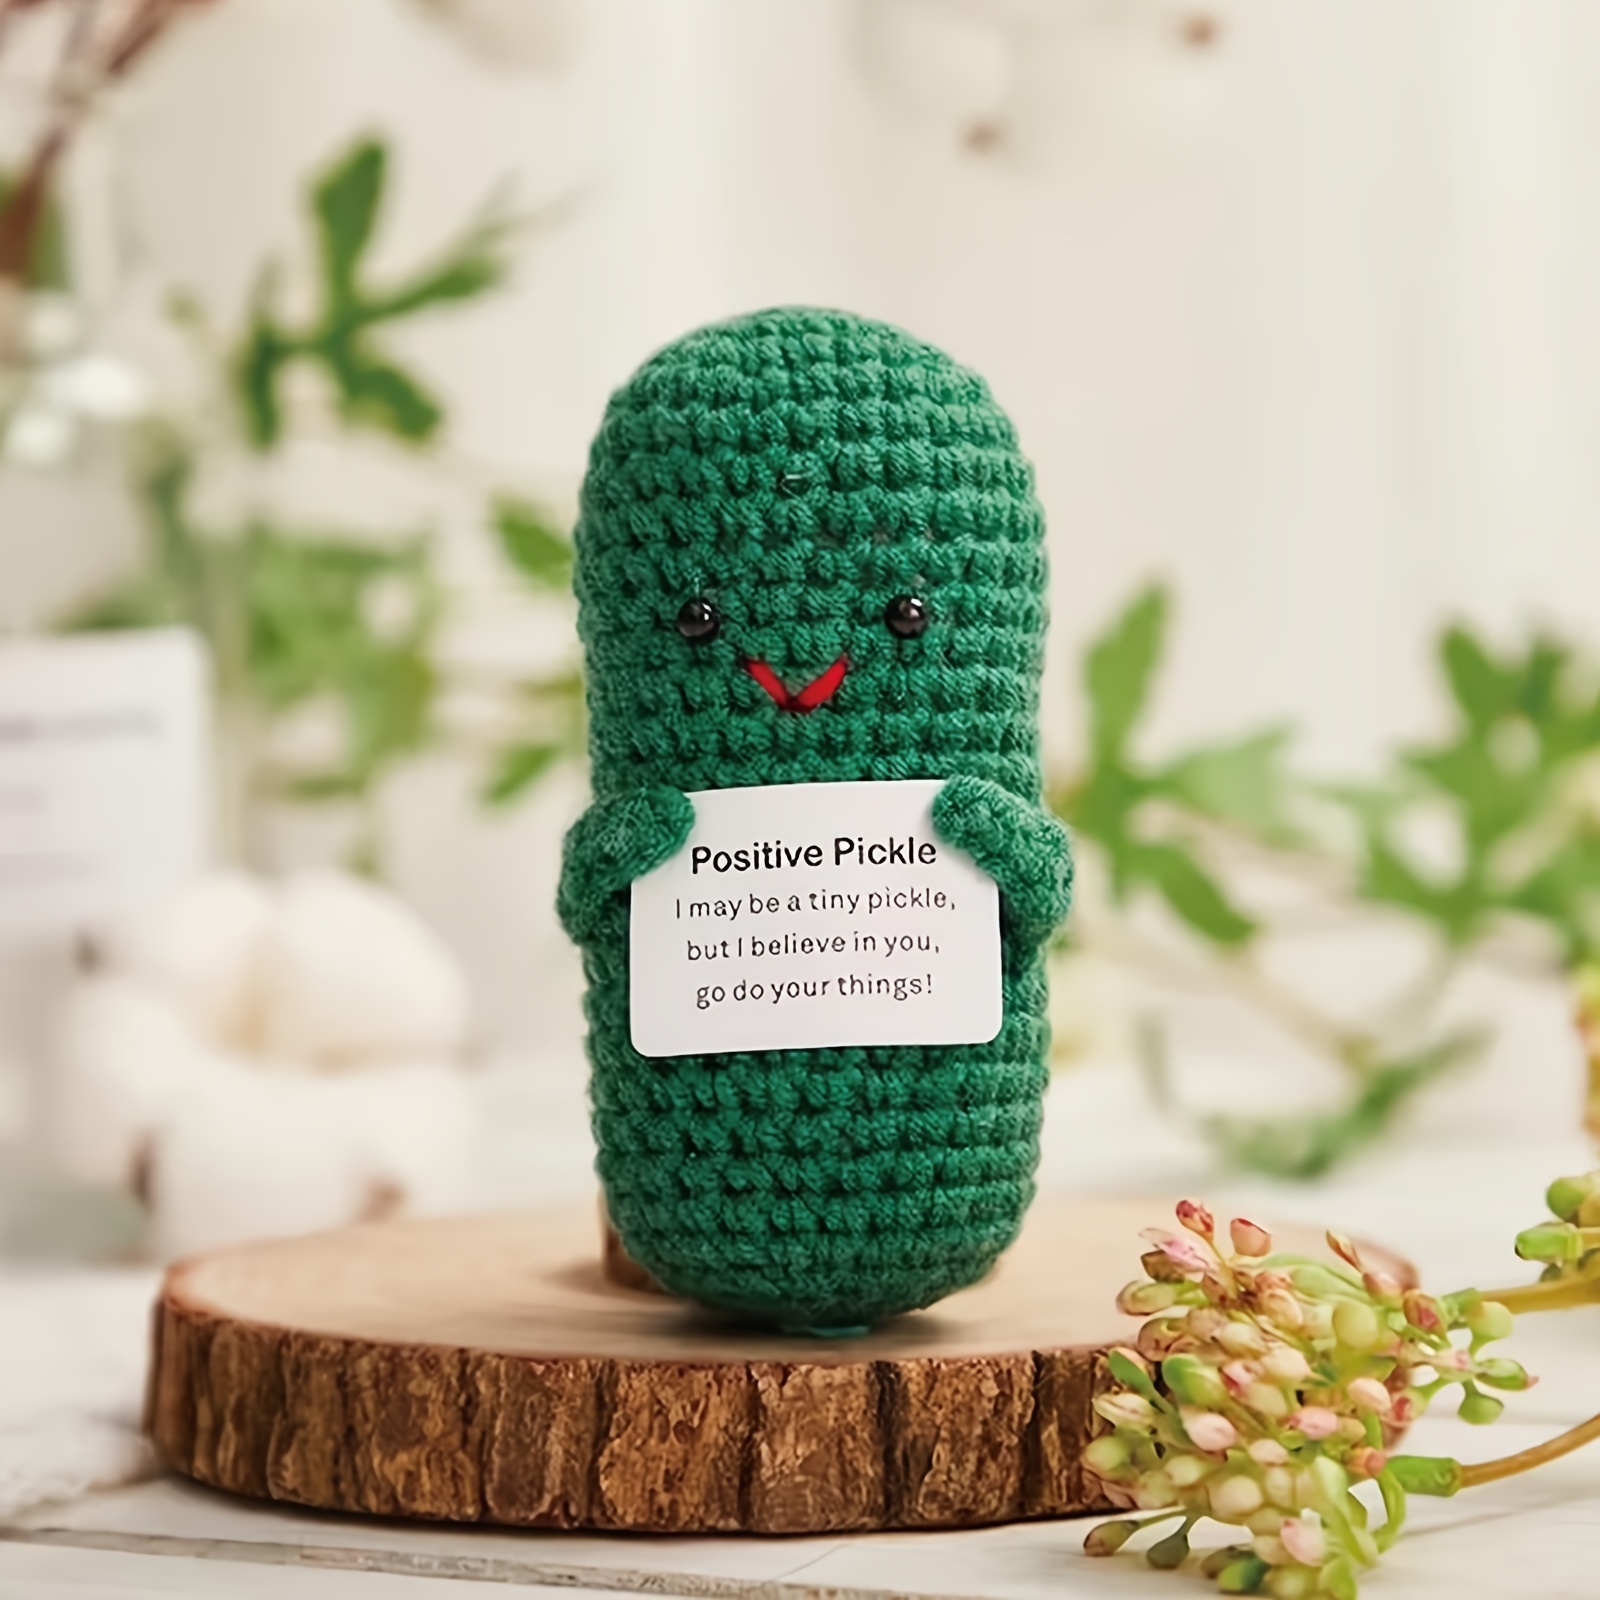 Funny Positive Potato,Cute Wool Knitting Doll with Positive Card